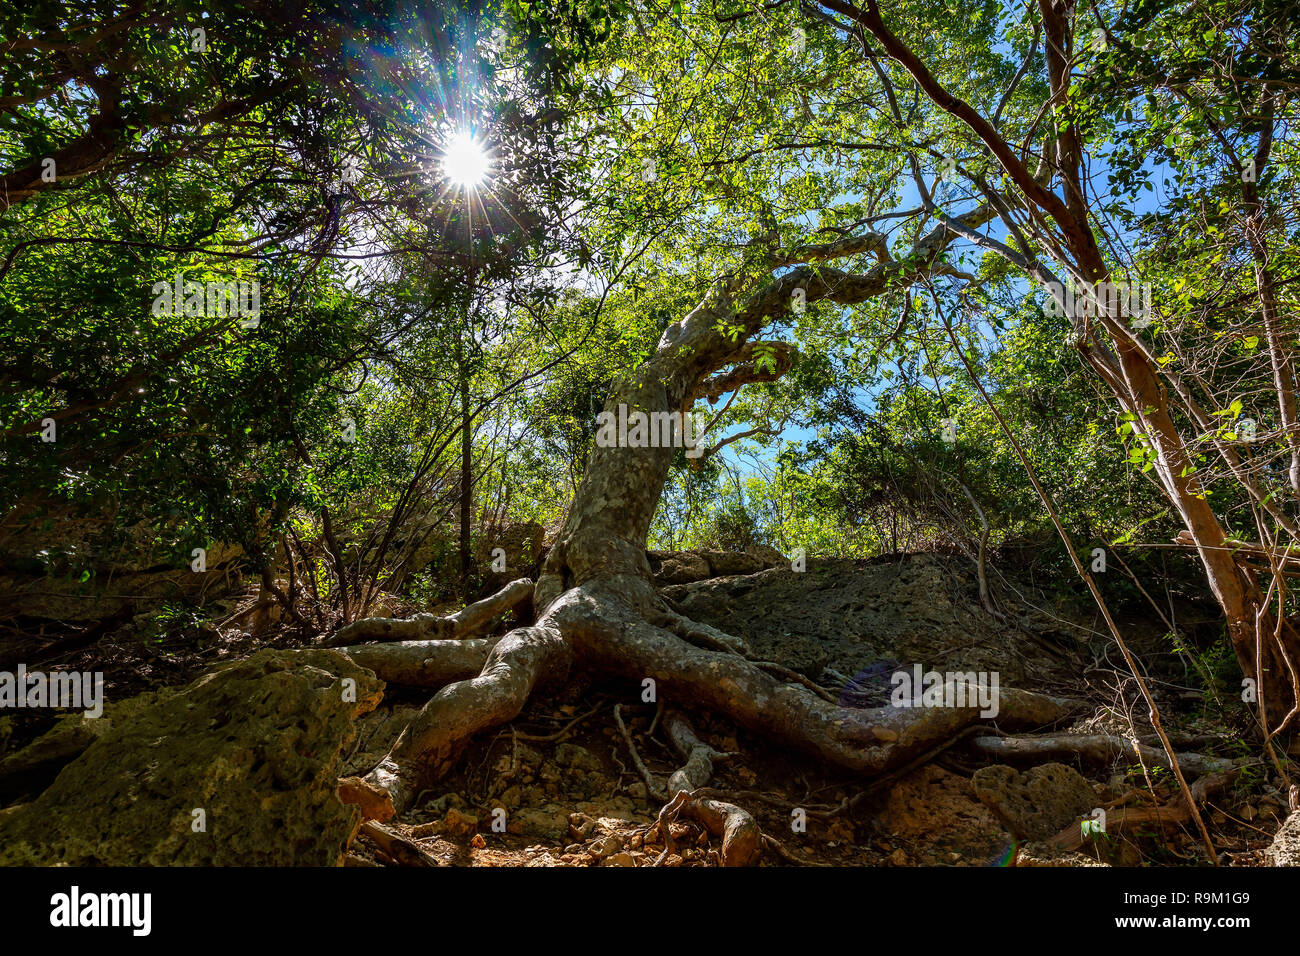 Old Guayacan tree scenic place at guanica dry forest attraction Stock Photo